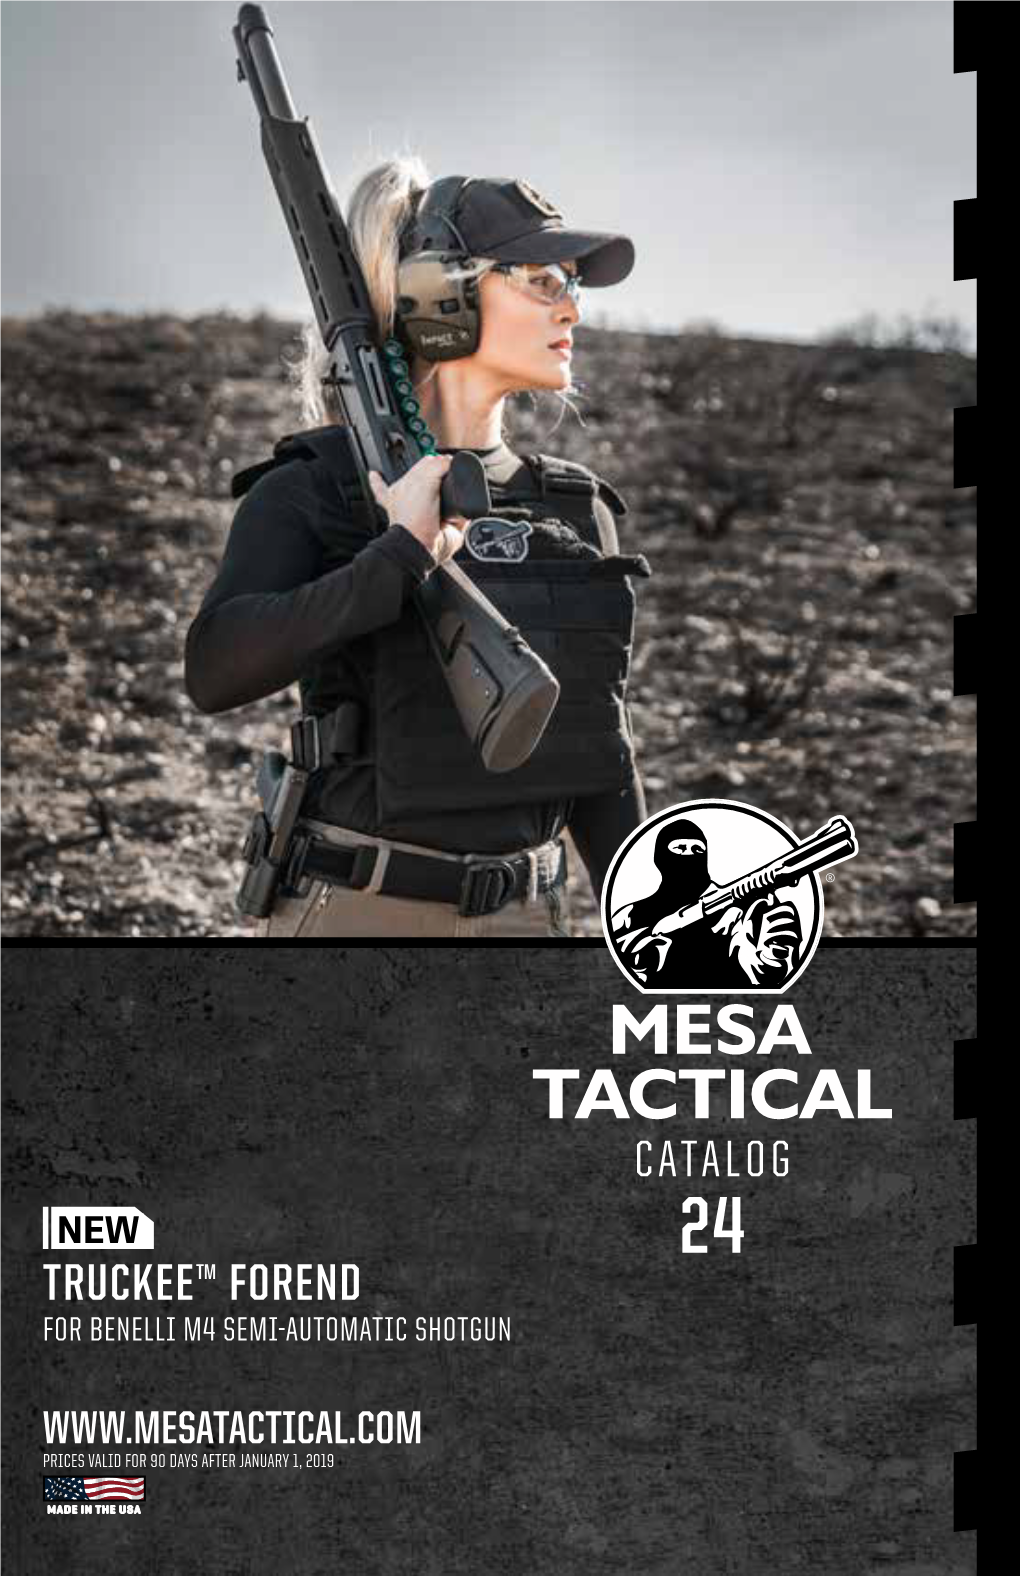 MESA TACTICAL Urbino Pocket Sling Attachments 8 in 2019, Mesa Tactical Will Celebrate Its 16Th Year in Business